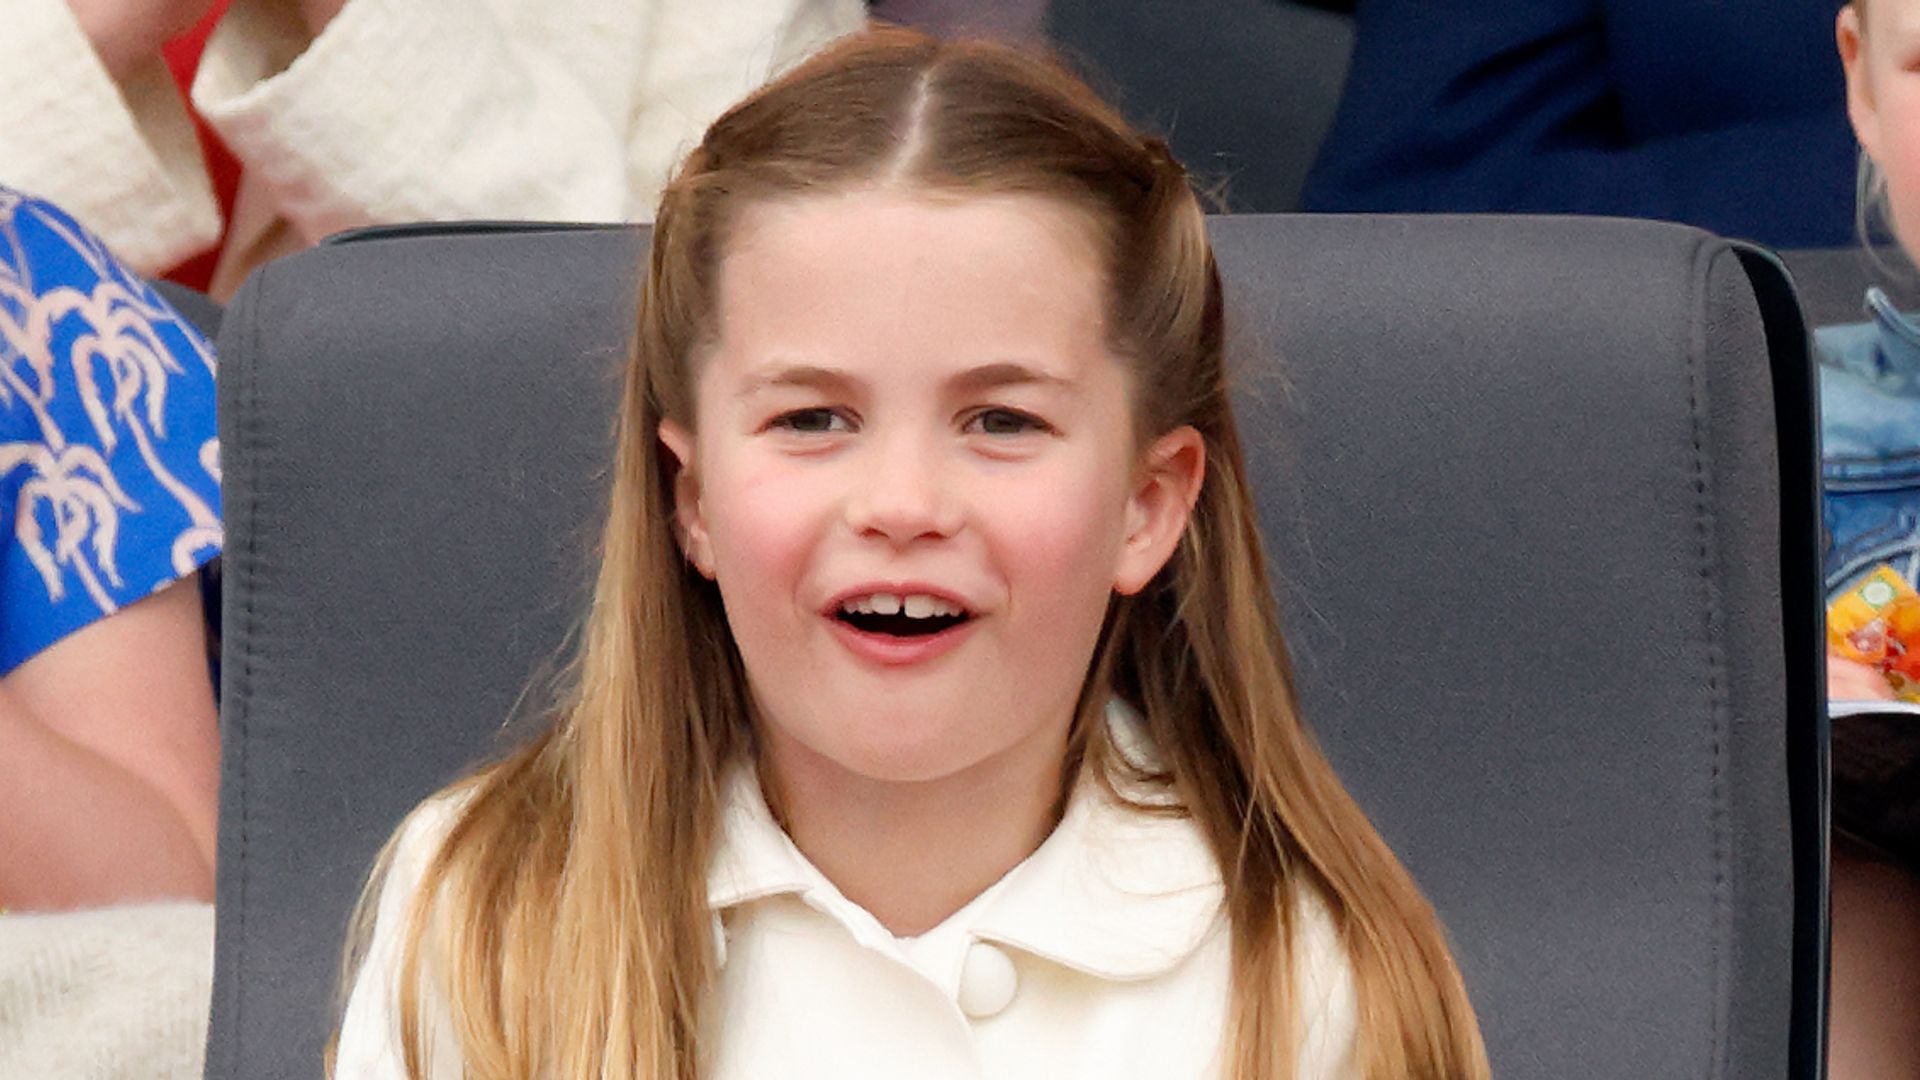 Is Princess Charlotte weeks away from her first tiara moment?